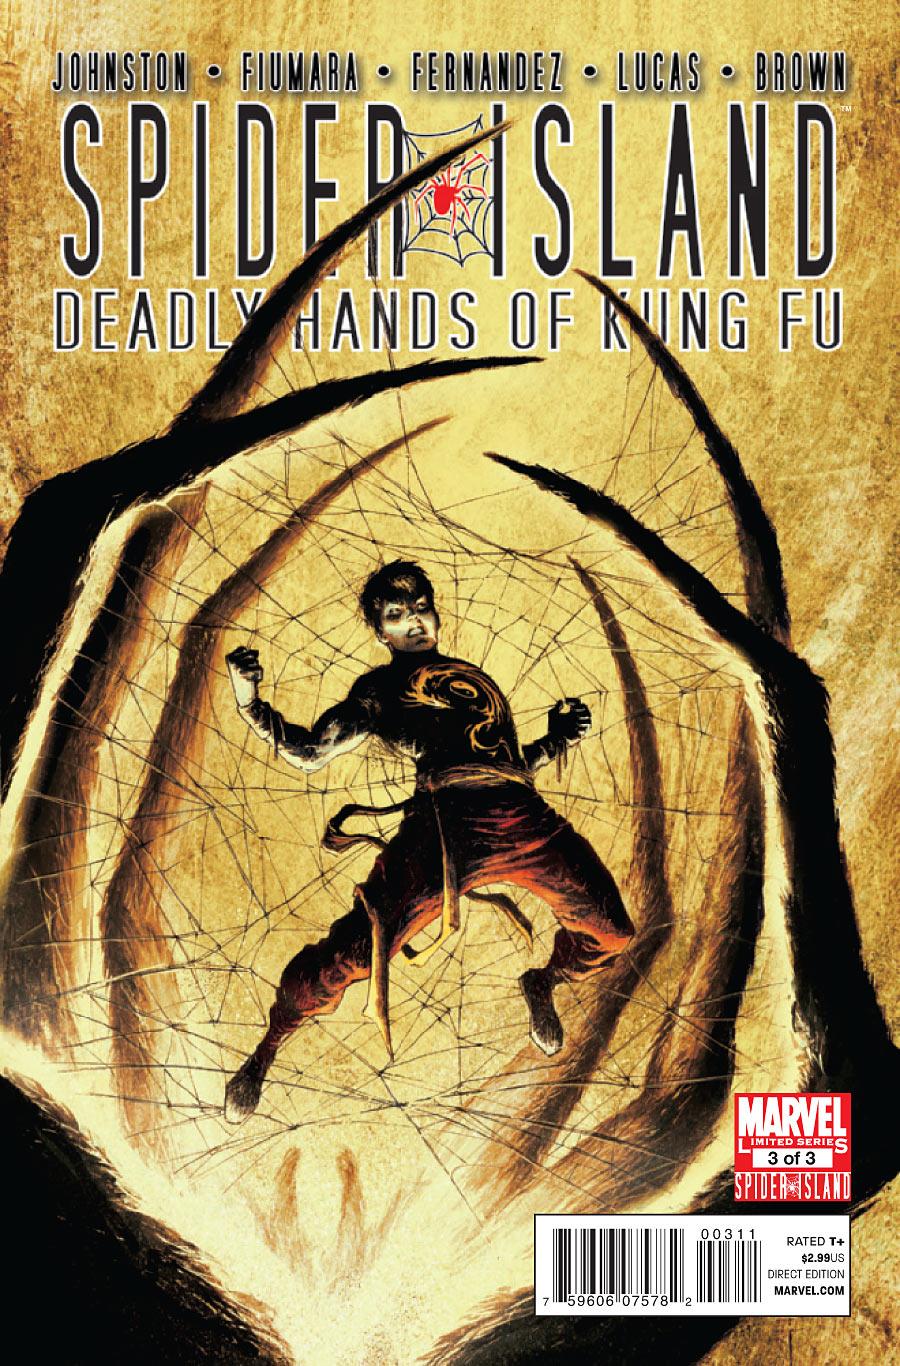 Spider-Island: Deadly Hands of Kung Fu Vol. 1 #3